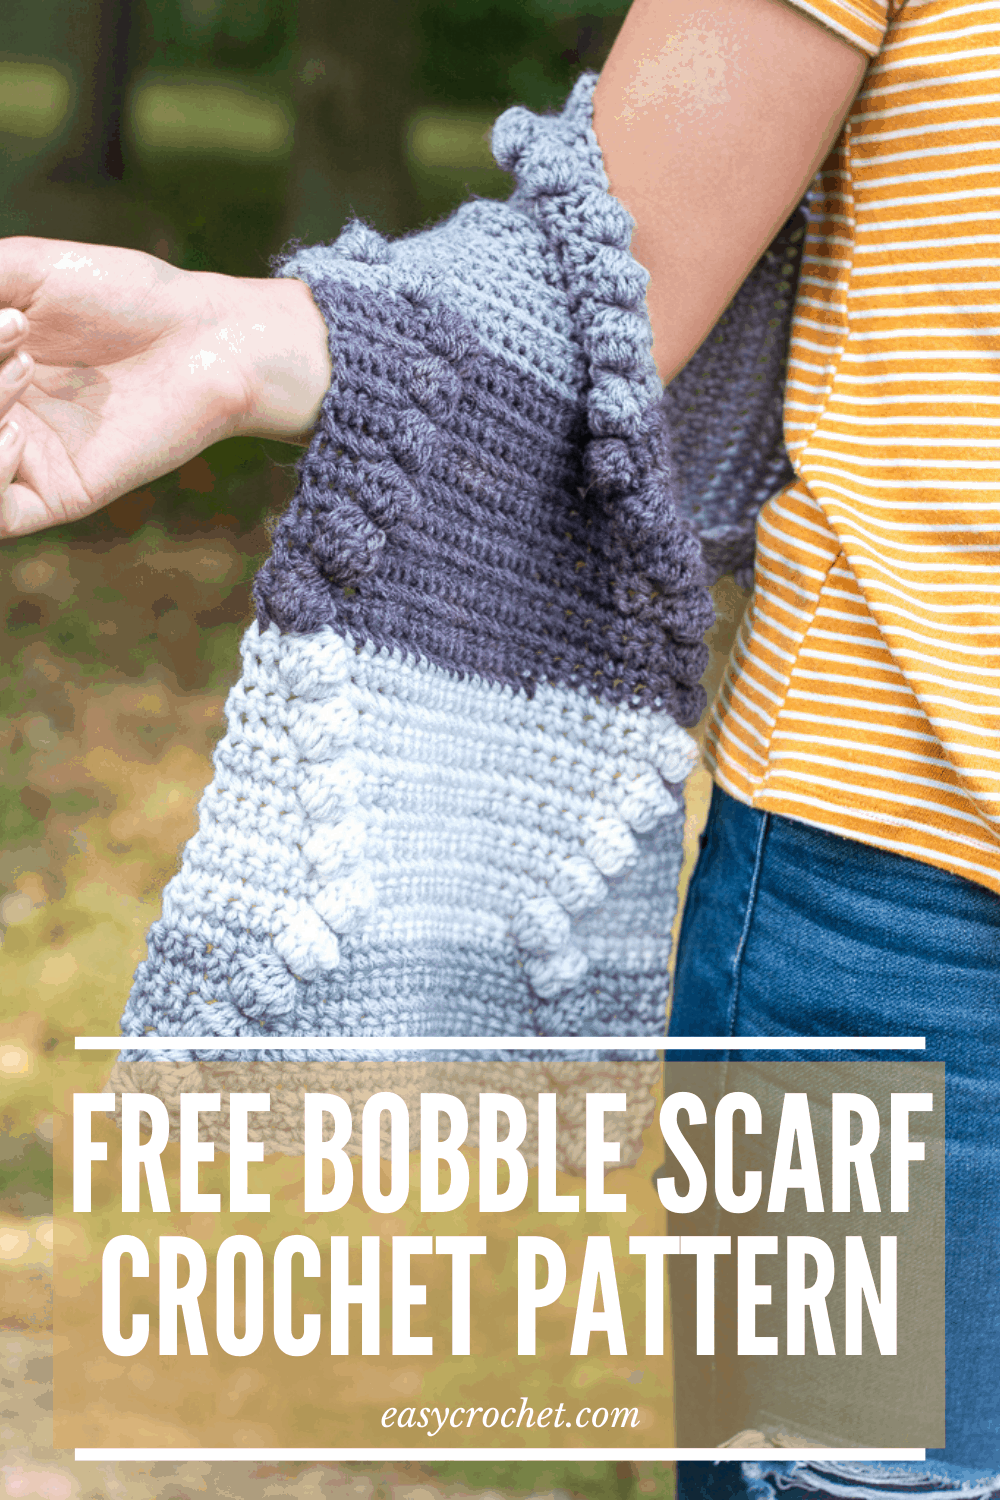 Bobble Scarf Crochet Pattern - Learn how to make this simple crochet scarf with the free pattern from easycrochet.com via @easycrochetcom